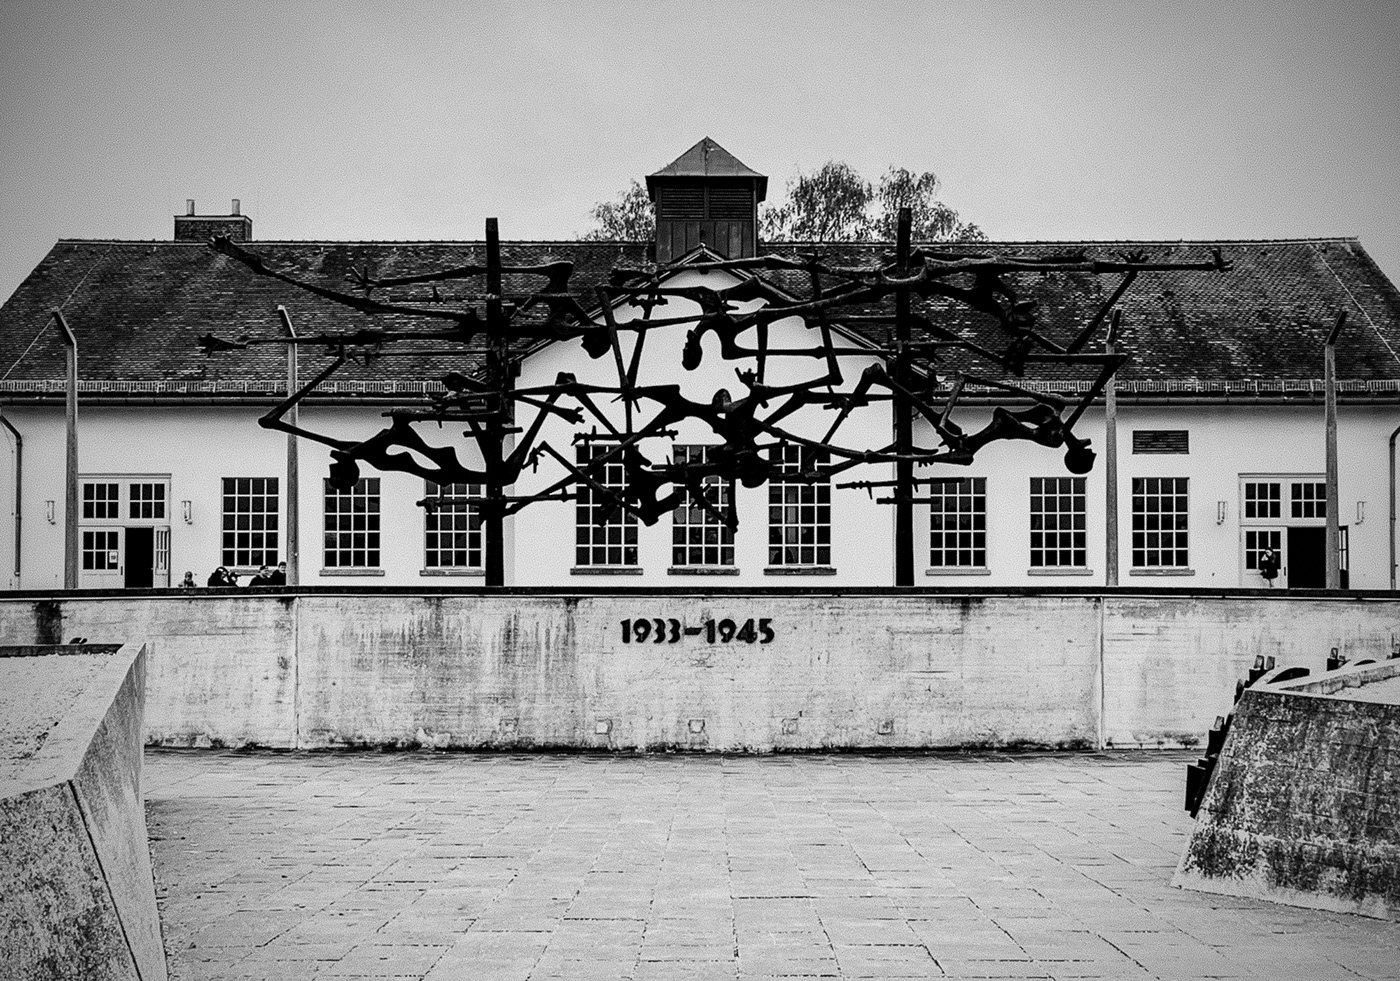 2nd world war dachau concentration camp fascism germany history holocaust Memorial museum national socialism never again